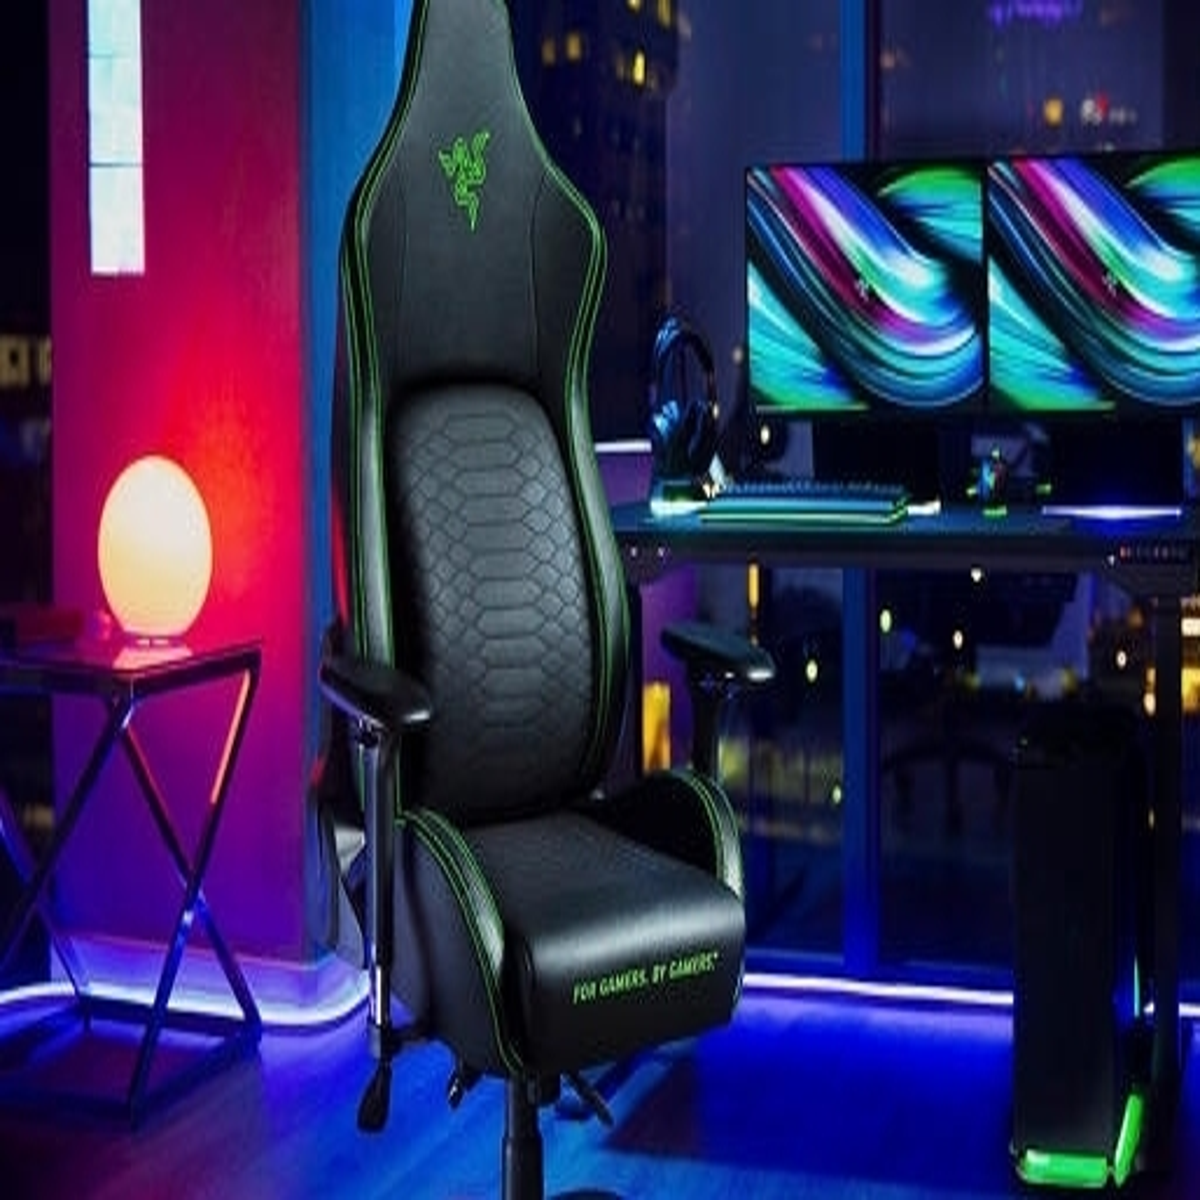 The Razer Iskur is offer chair Black gaming for $350 on this Friday